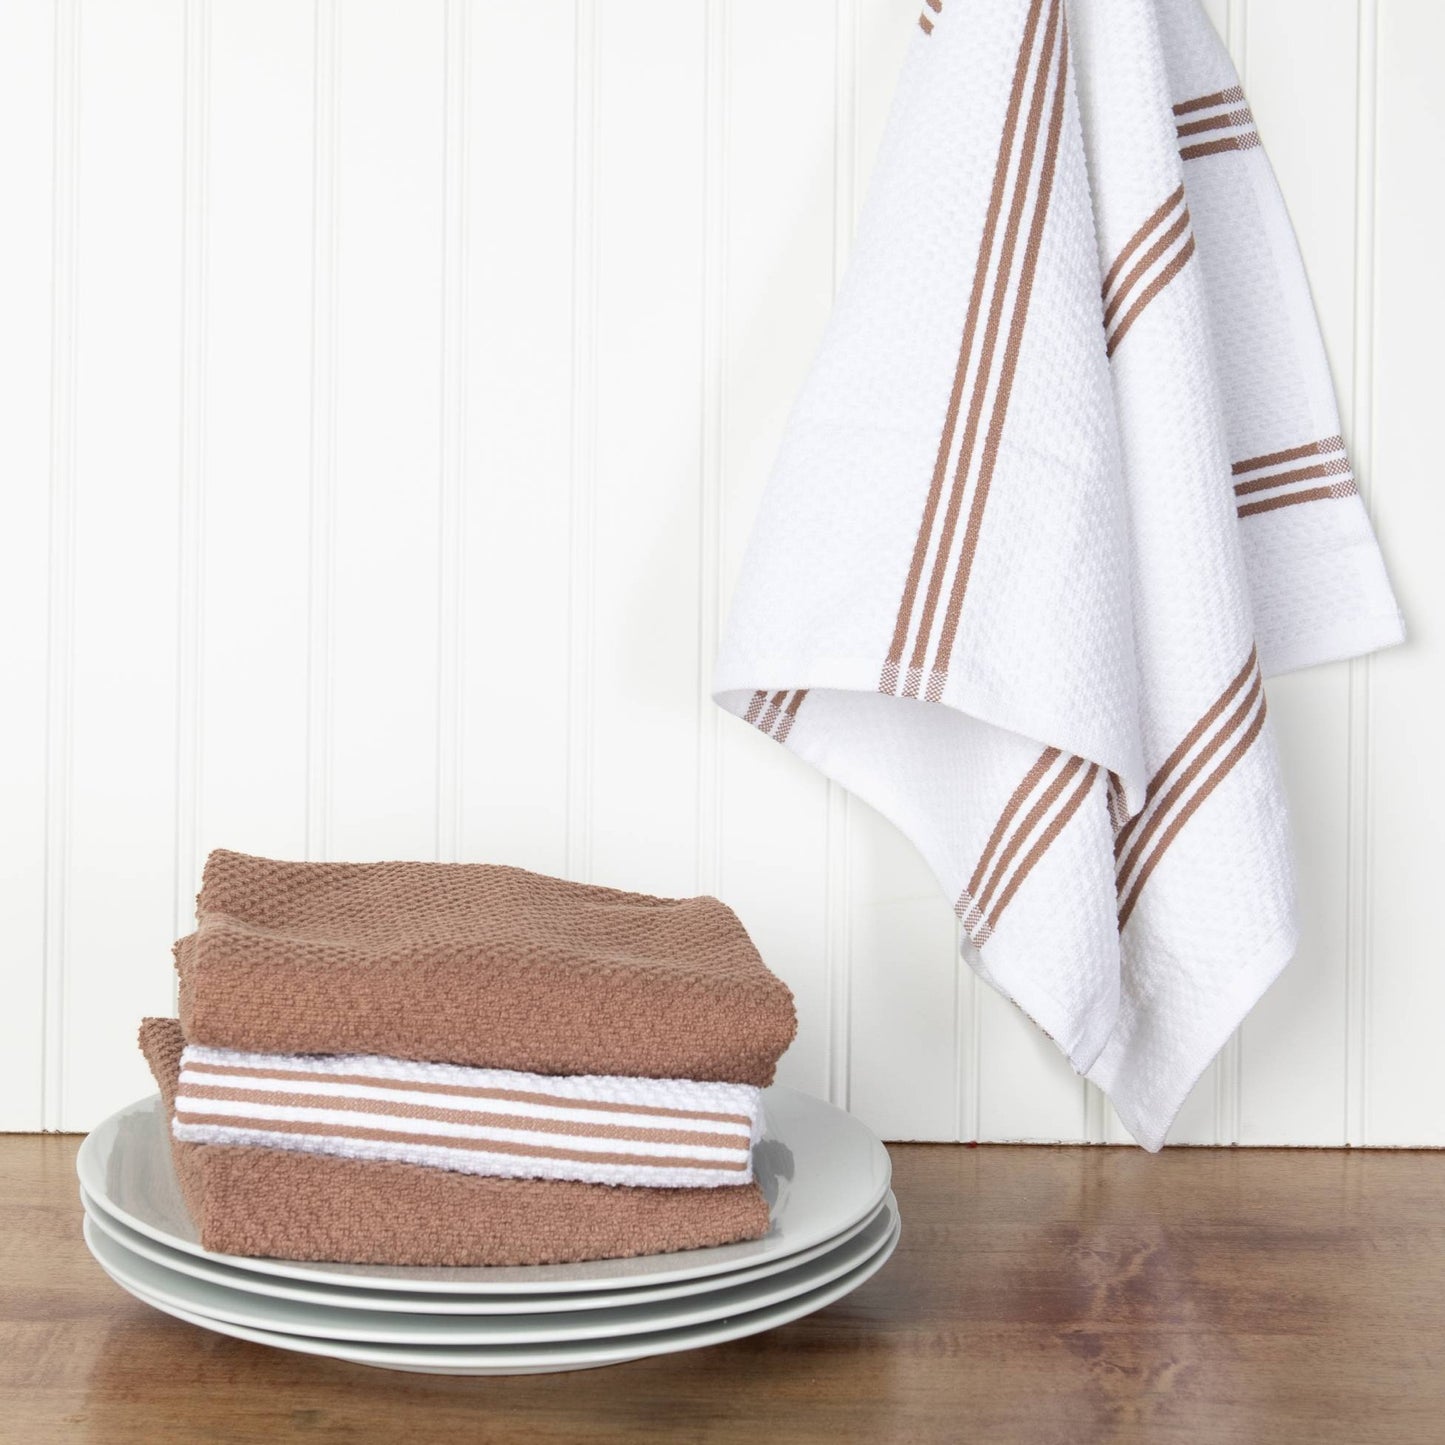 Set of 4 Cotton Terry Tea Towels available in Seven Colours